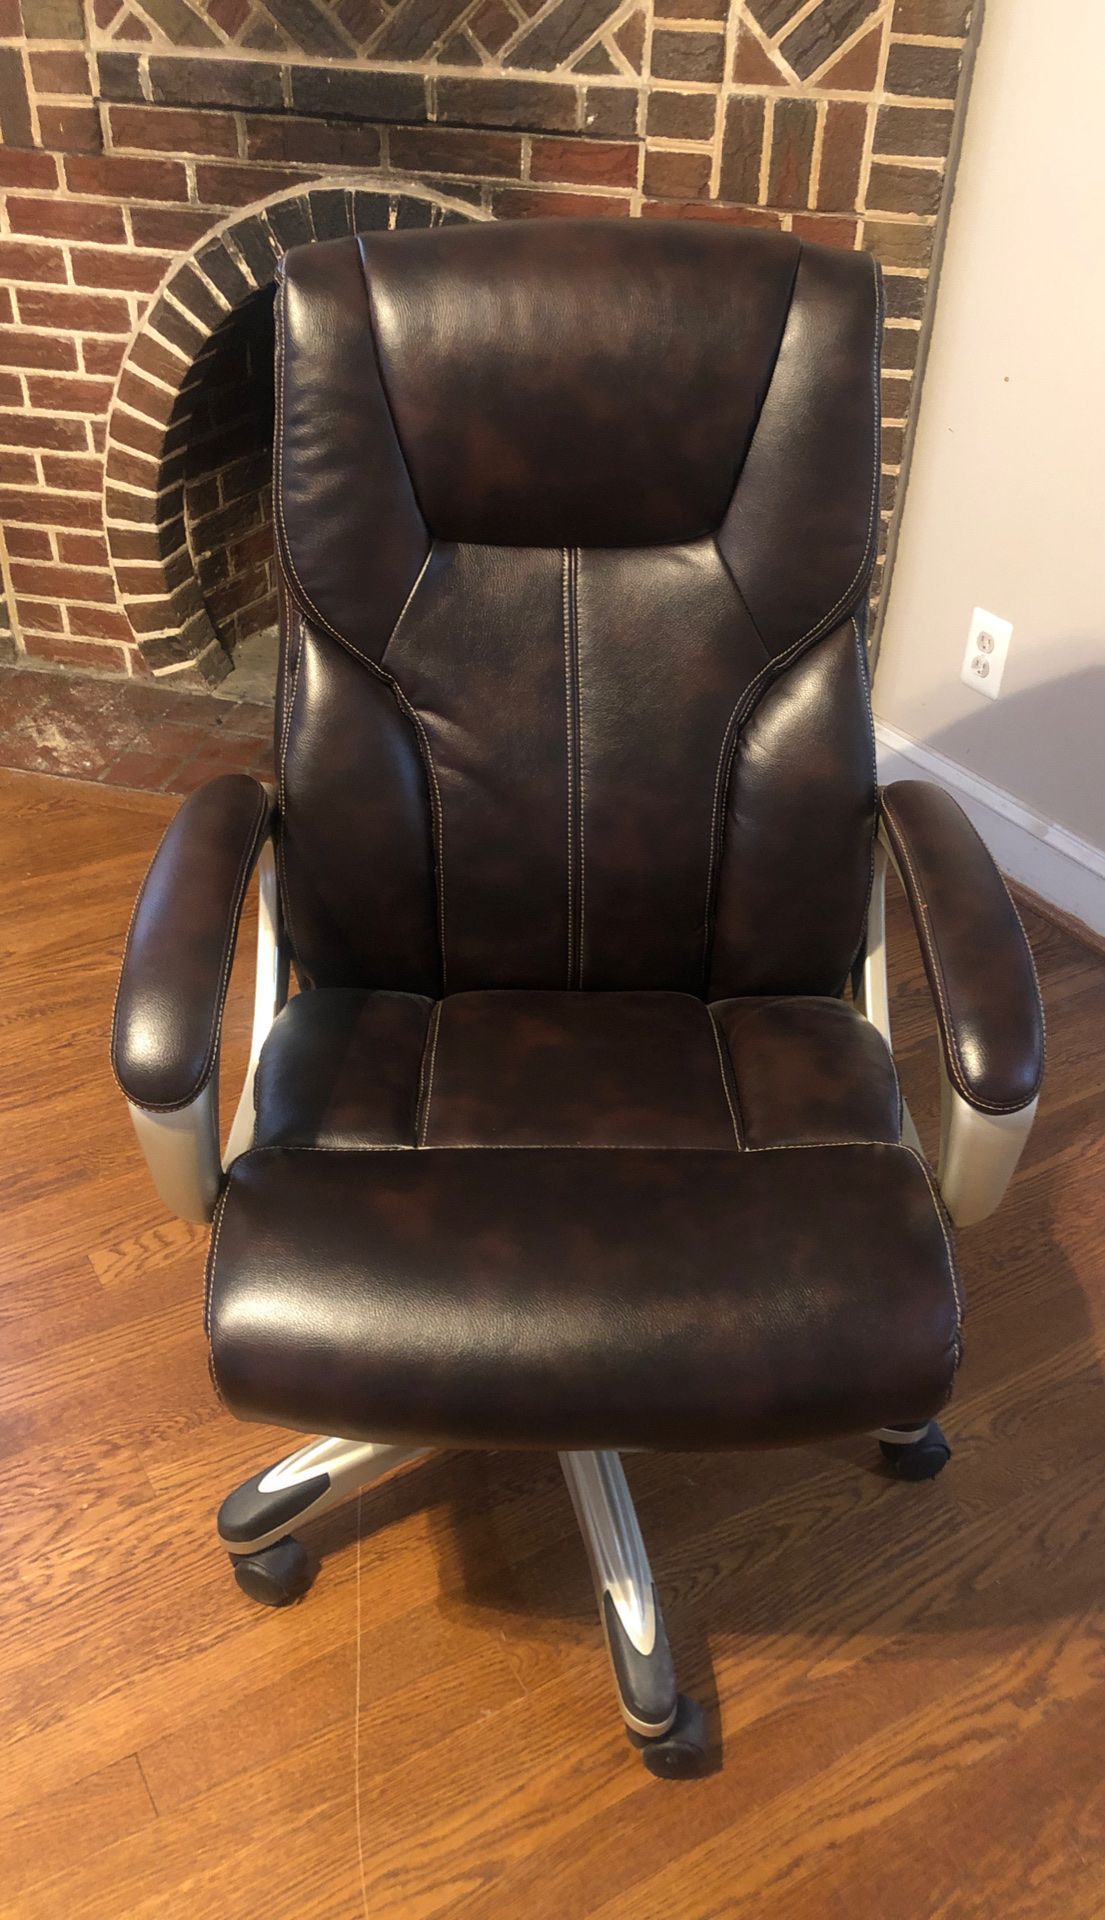 Brand new office chair